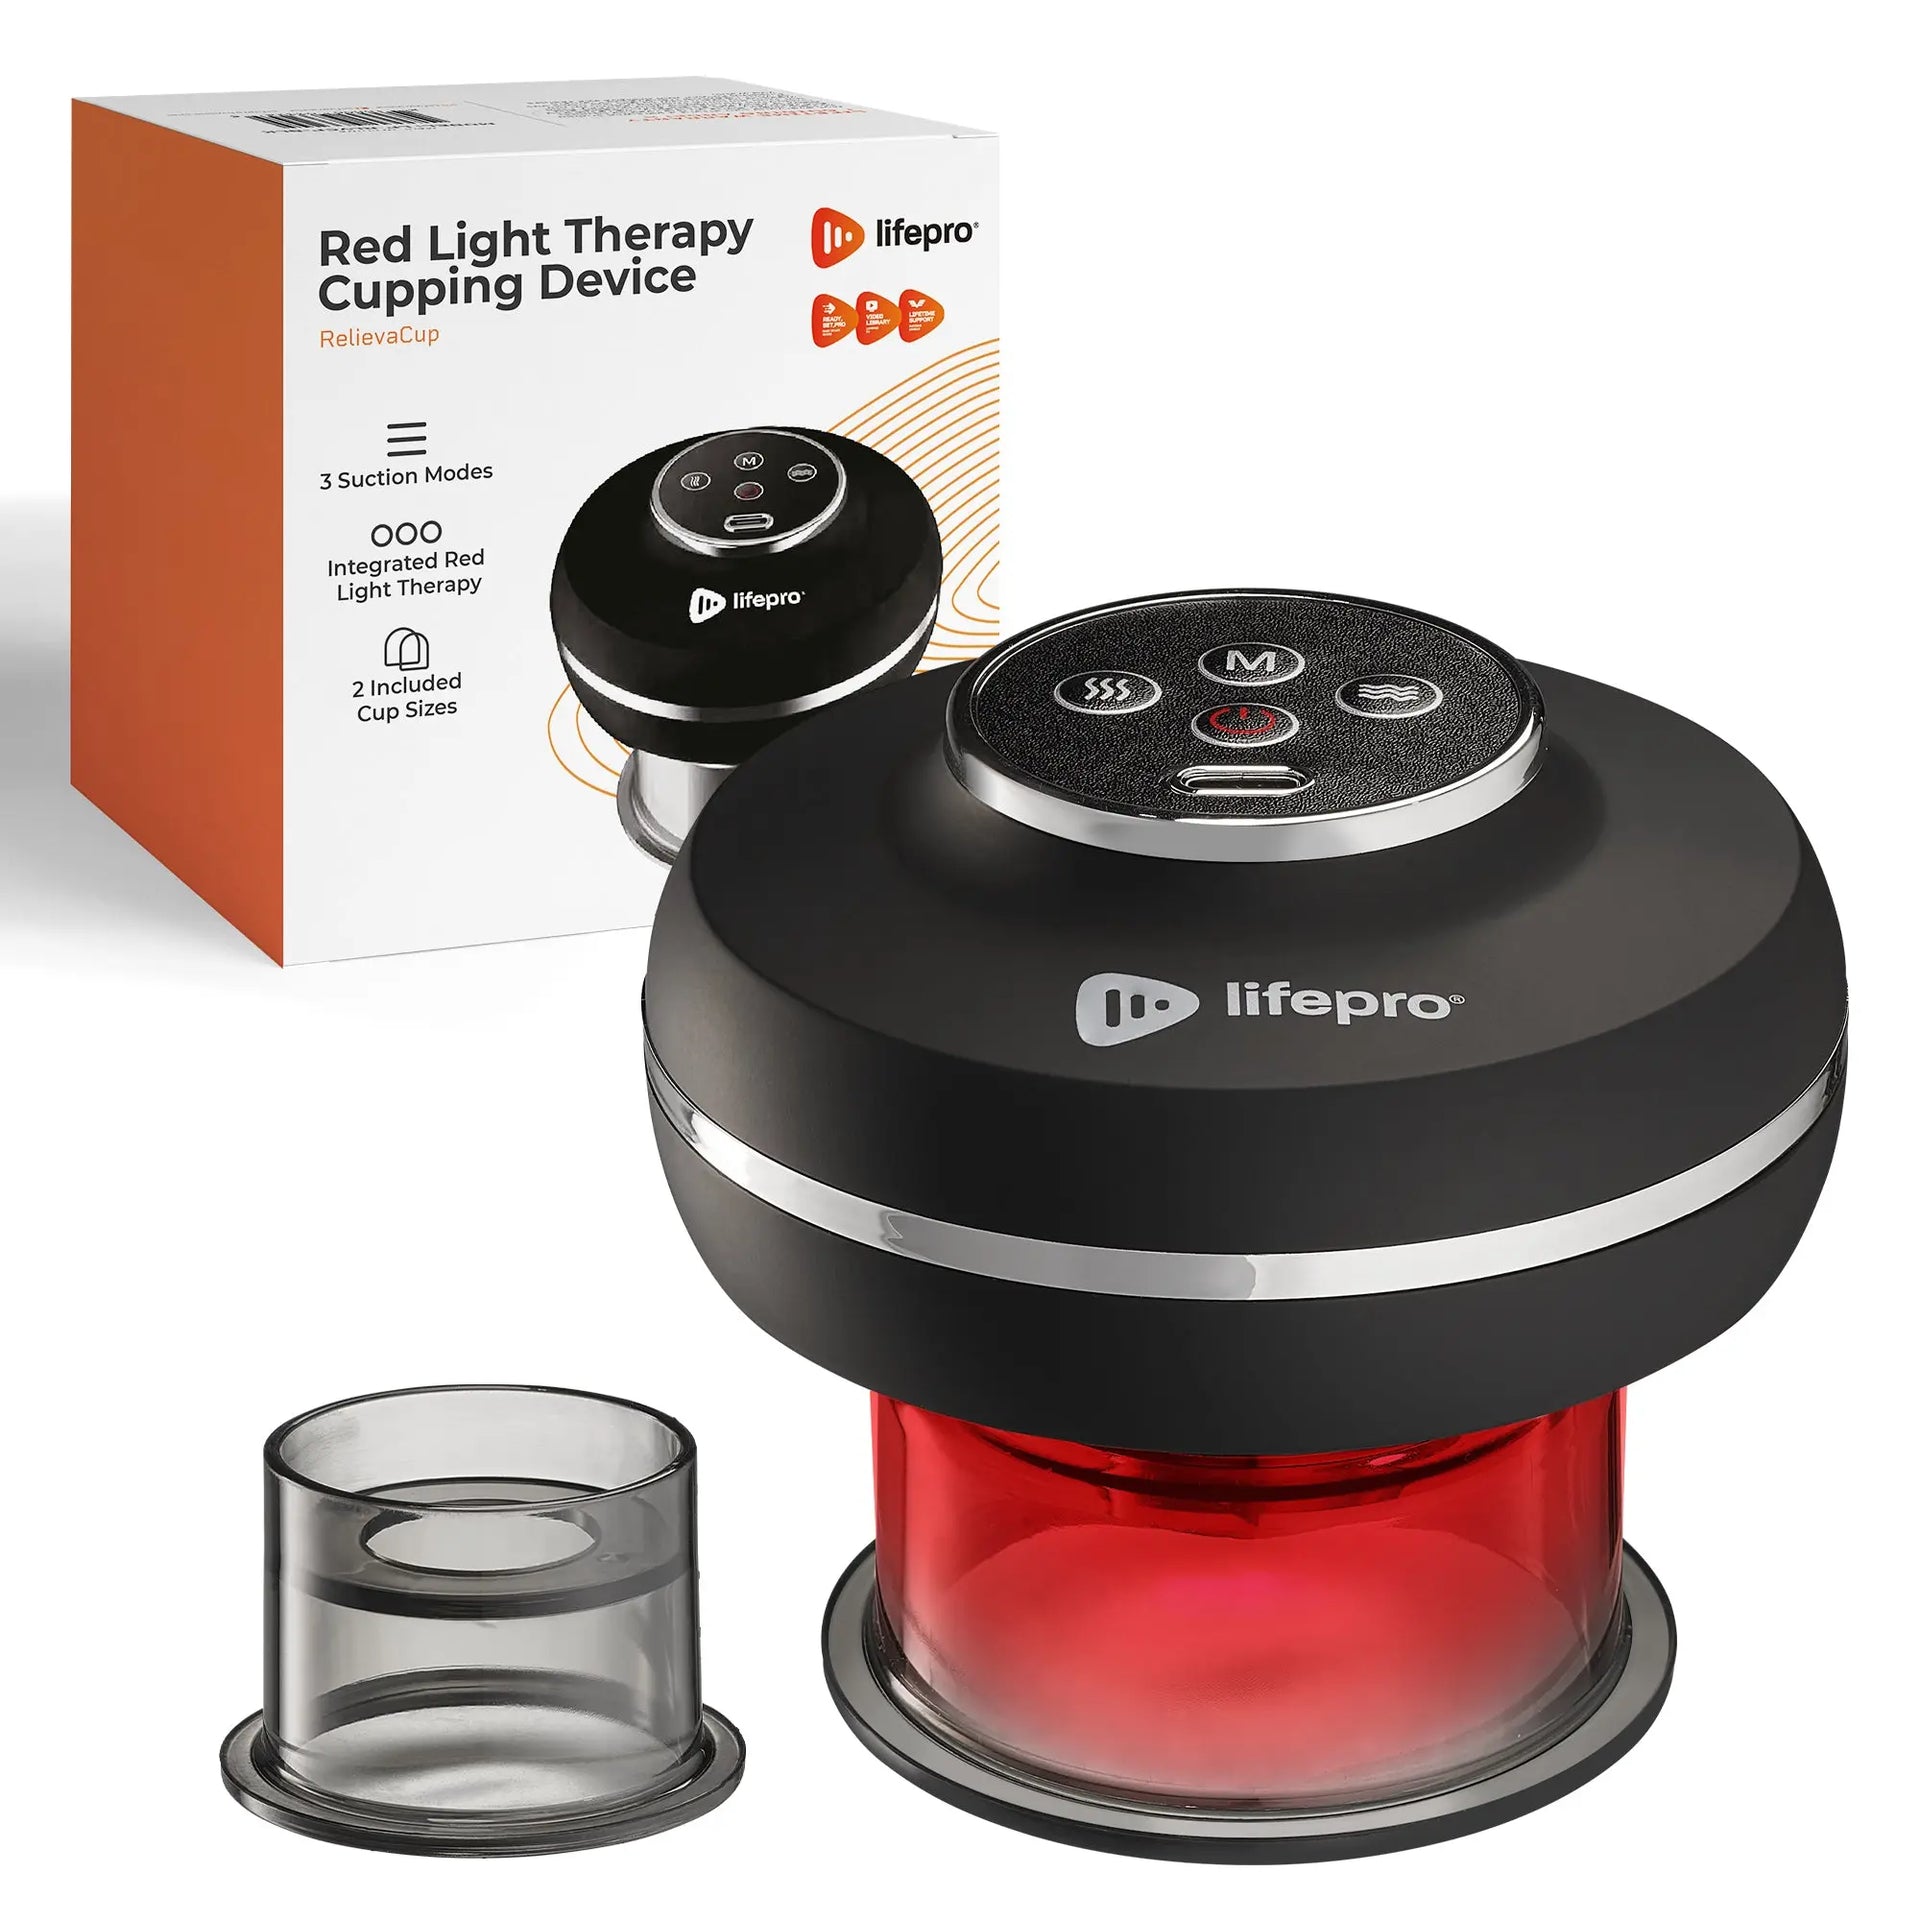 Relievacup™ Smart Cupping Device – Lifepro